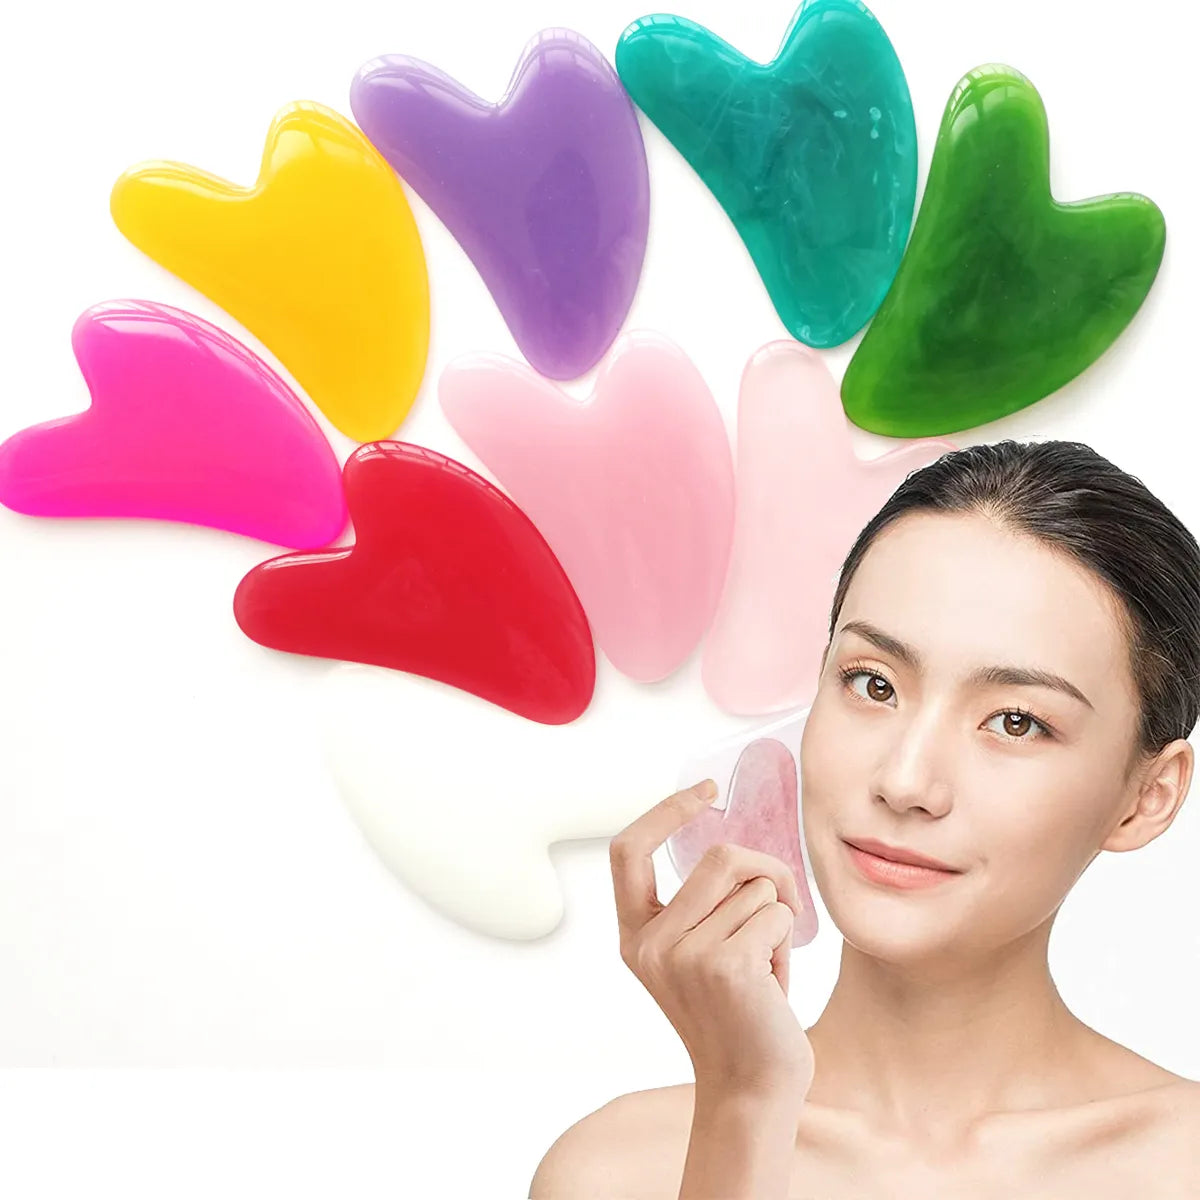 Heart Resin Gua Sha Massage Board Acupoint Beeswax Guasha Acupuncture SPA Massager Scrapers Tools For Face Neck Back Body Care  beautylum.com   